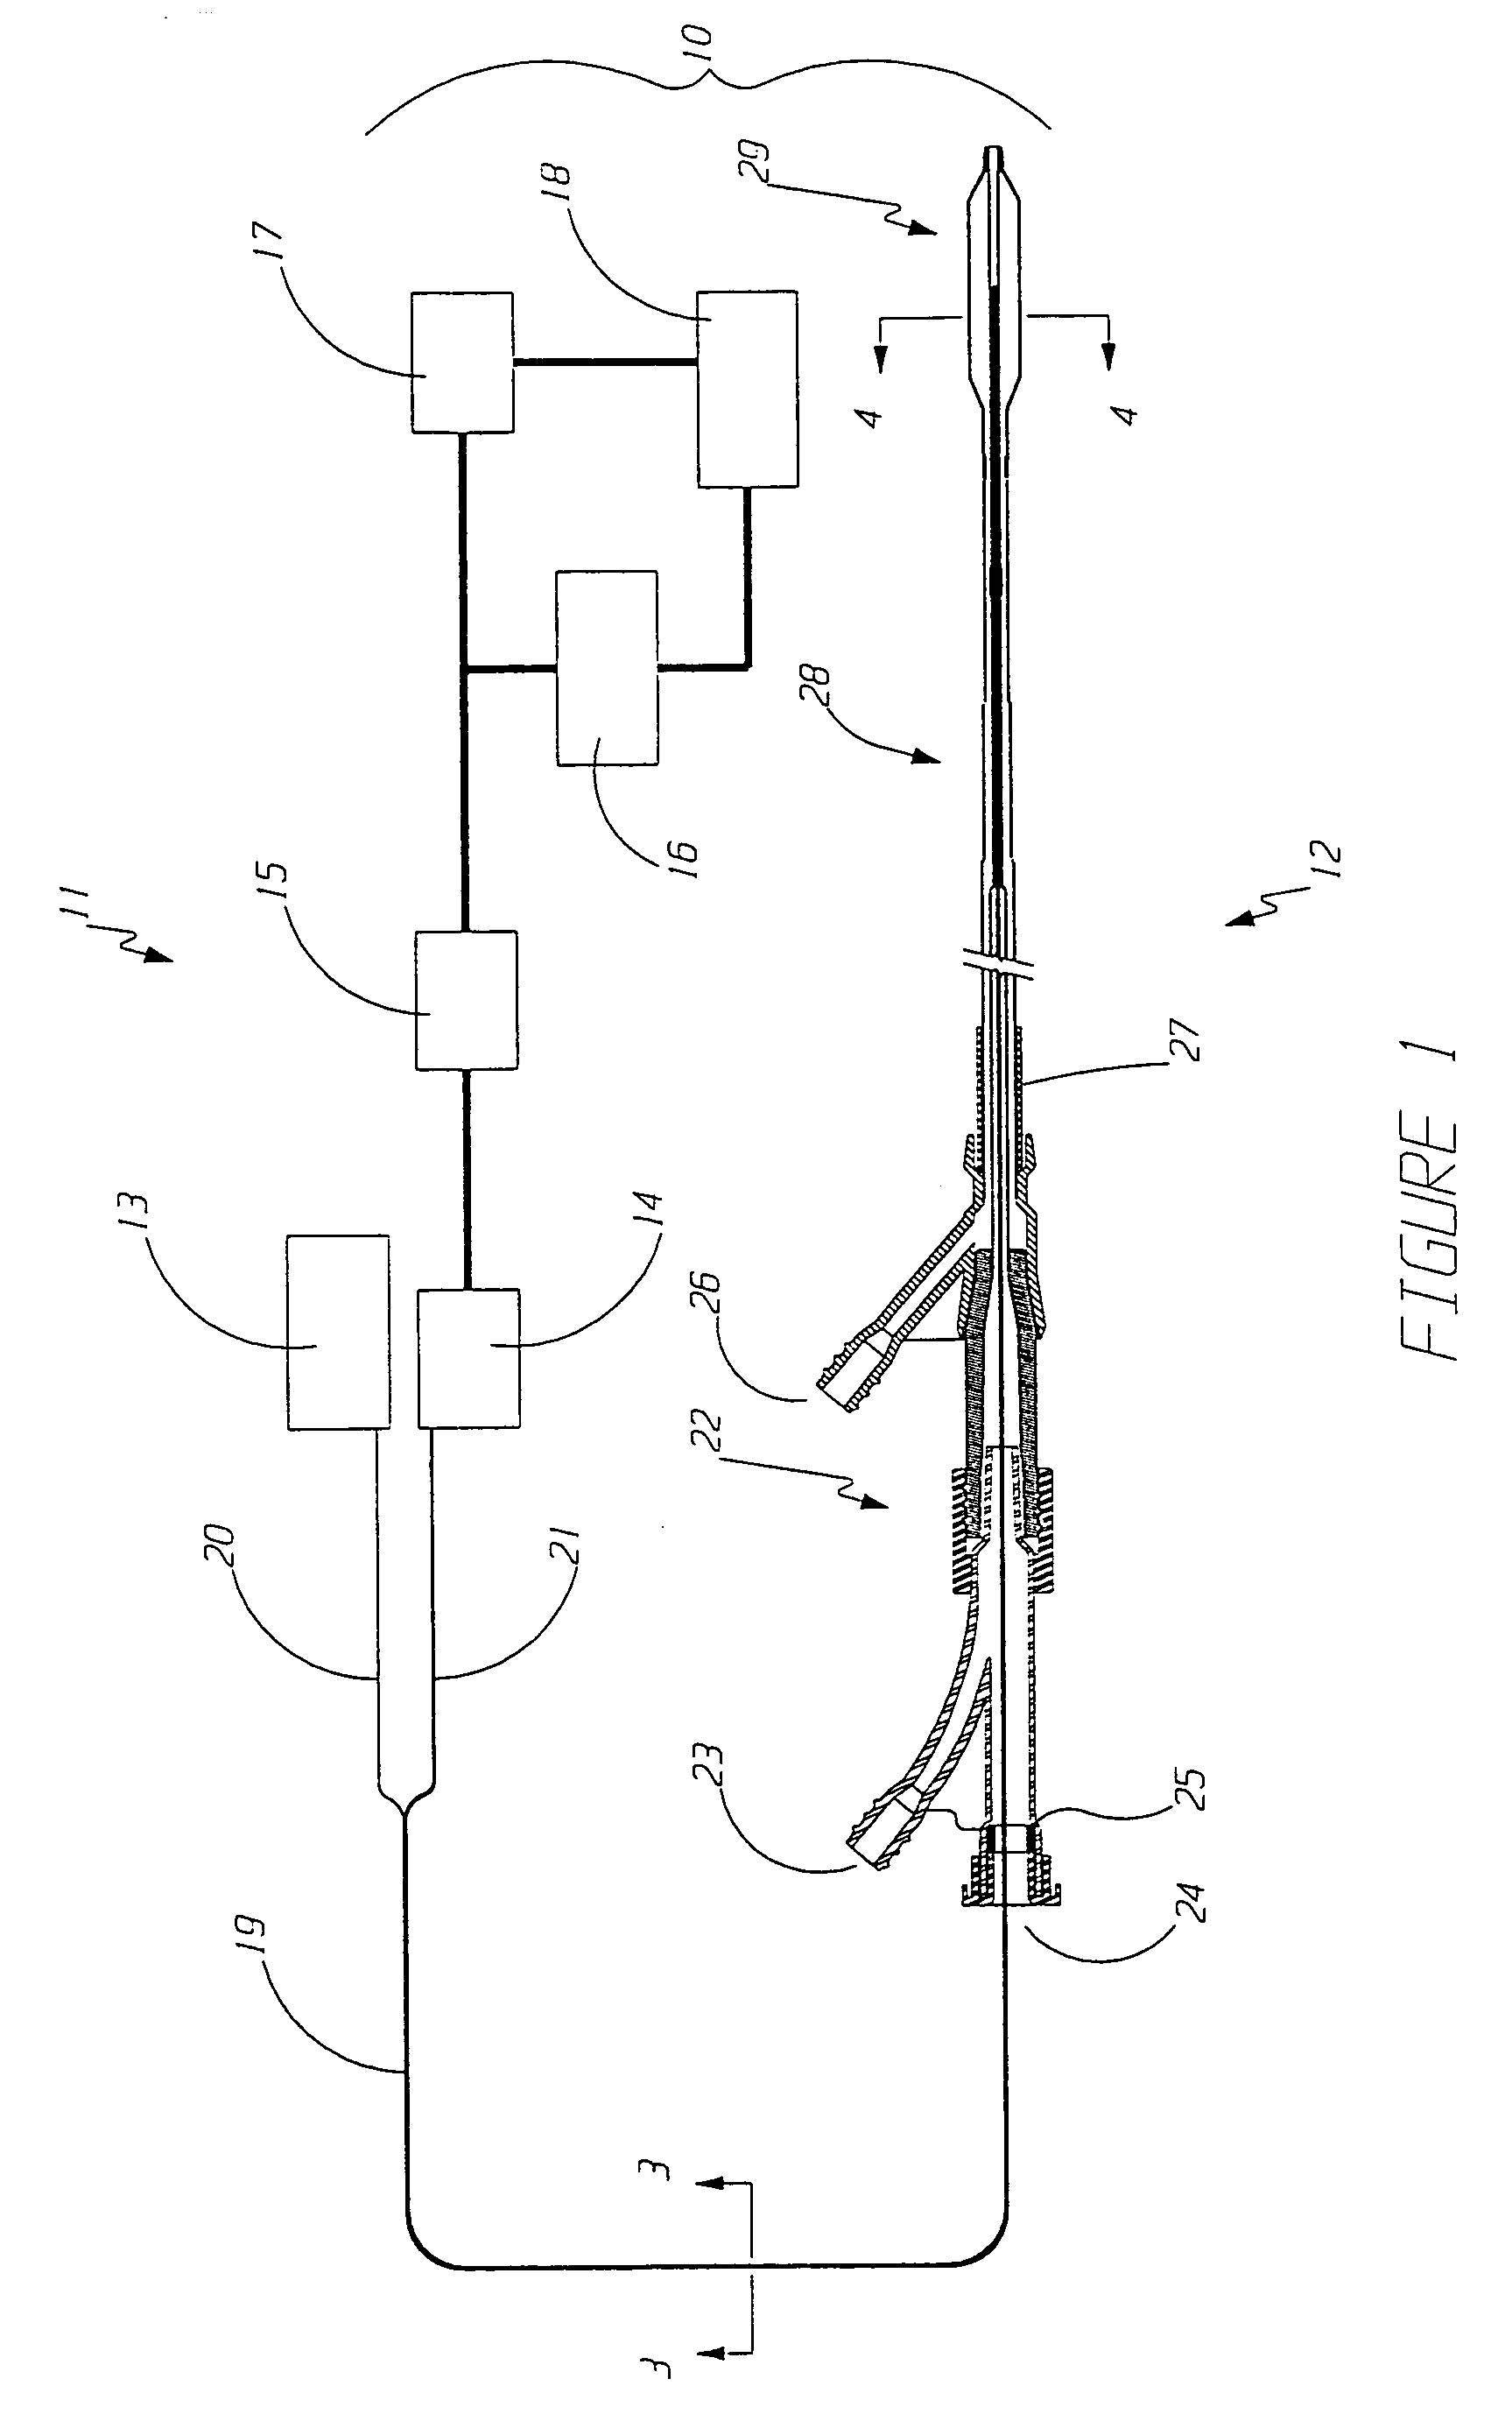 Methods of using an intravascular balloon catheter in combination with an angioscope